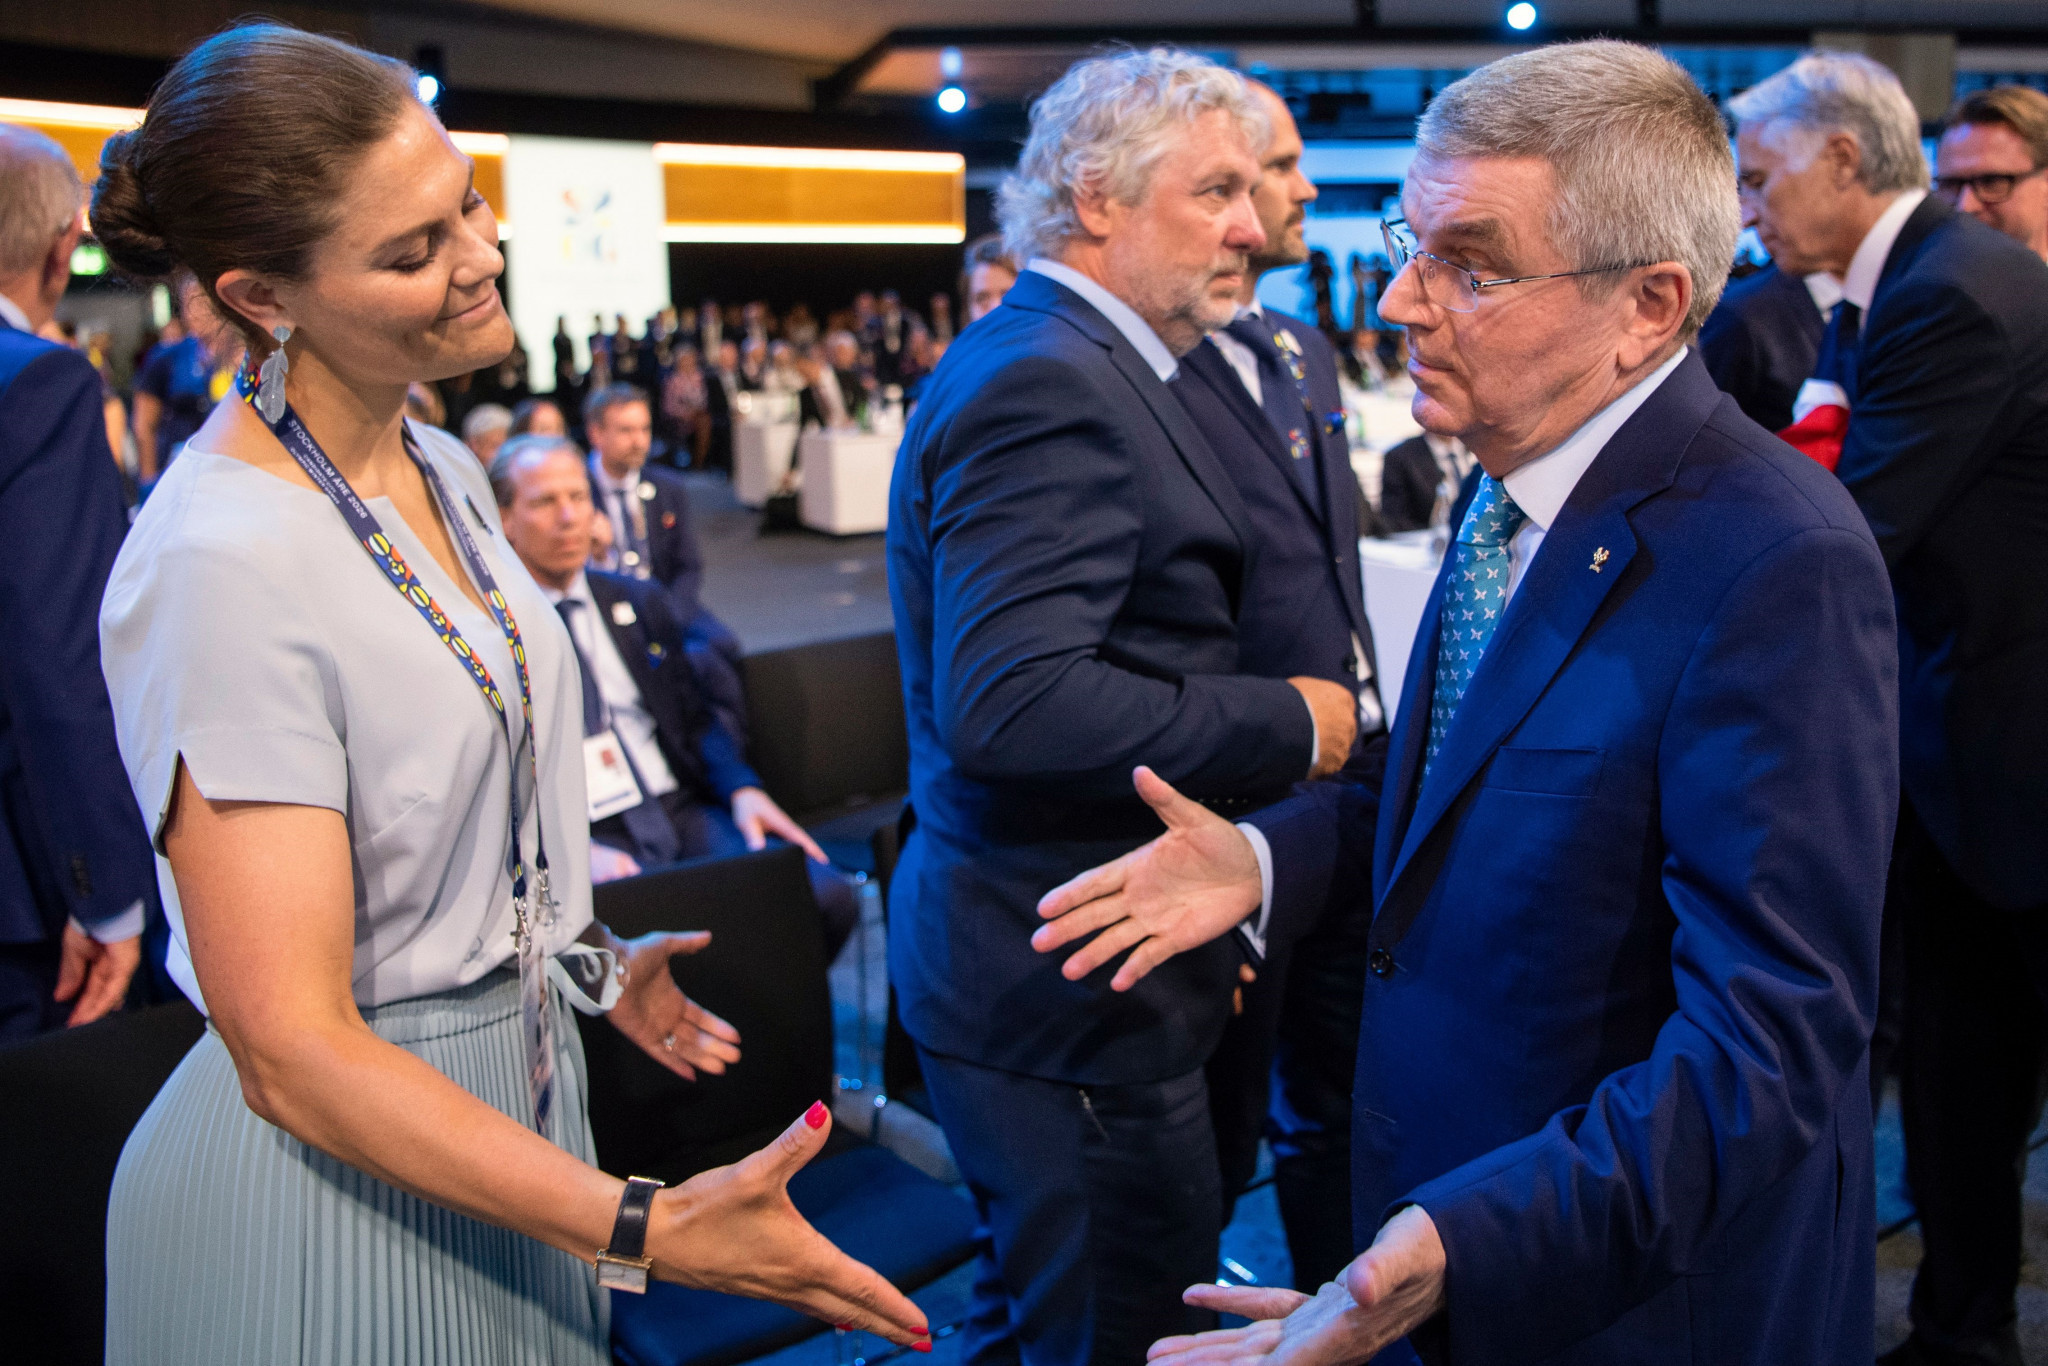 IOC President Thomas Bach commiserates with Sweden's Crown Princess Victoria after the Stockholm-Åre bid lost to Milan-Cortina for the 2026 hosting rights in 2019 ©Getty Images